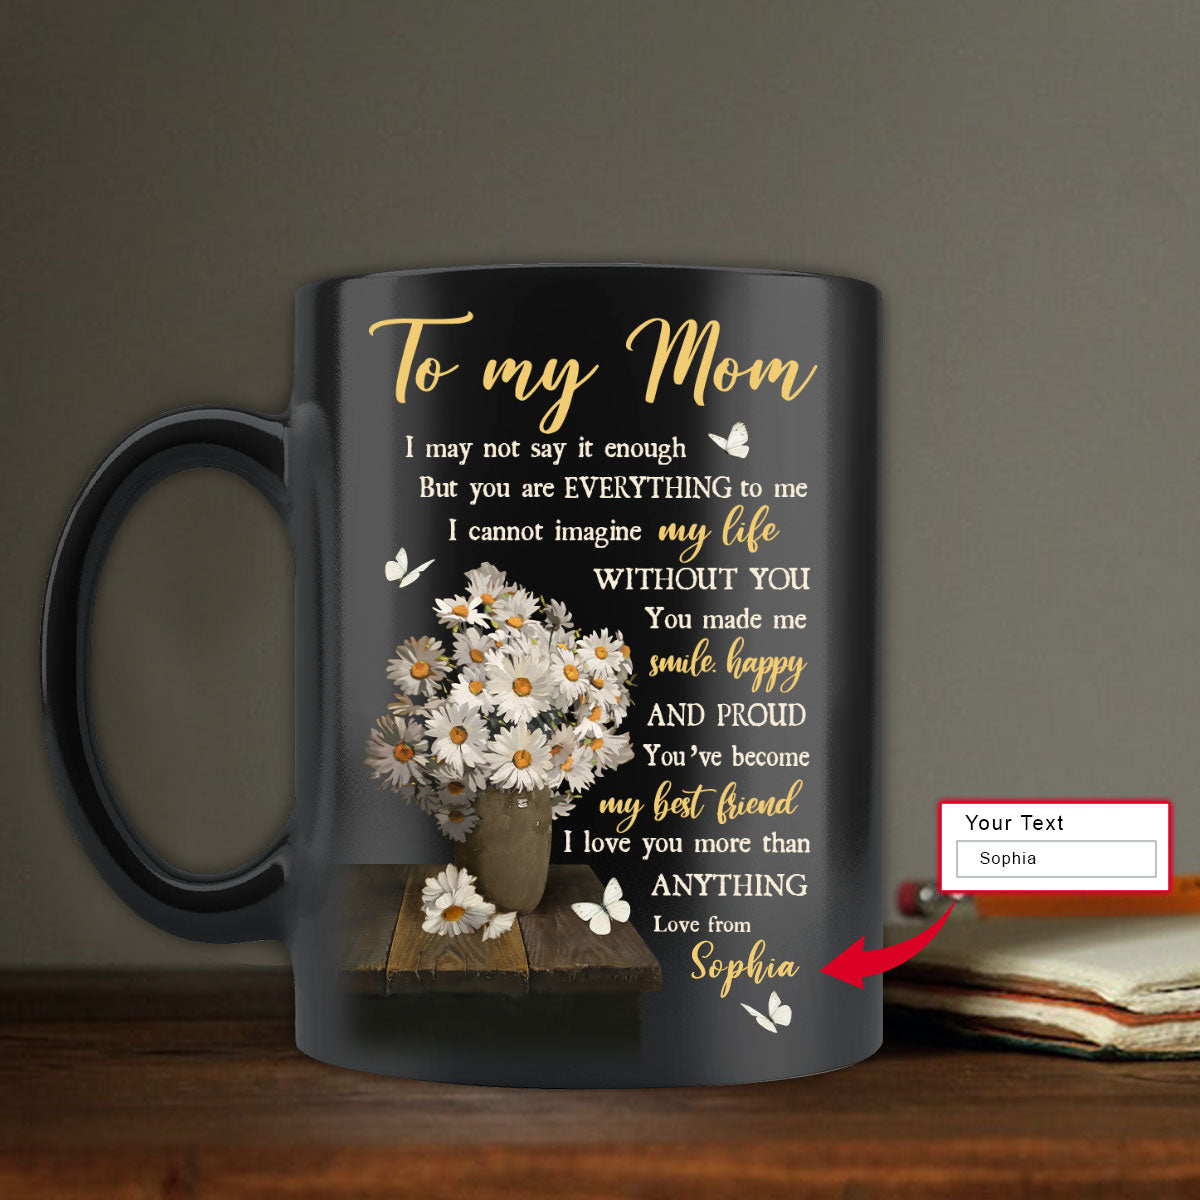 Gift For Mom Personalized Mug - Daughter to mom, Daisy vase, White butterfly Mug - Custom Gift For Mother's Day, Presents for Mom - I love you Mug